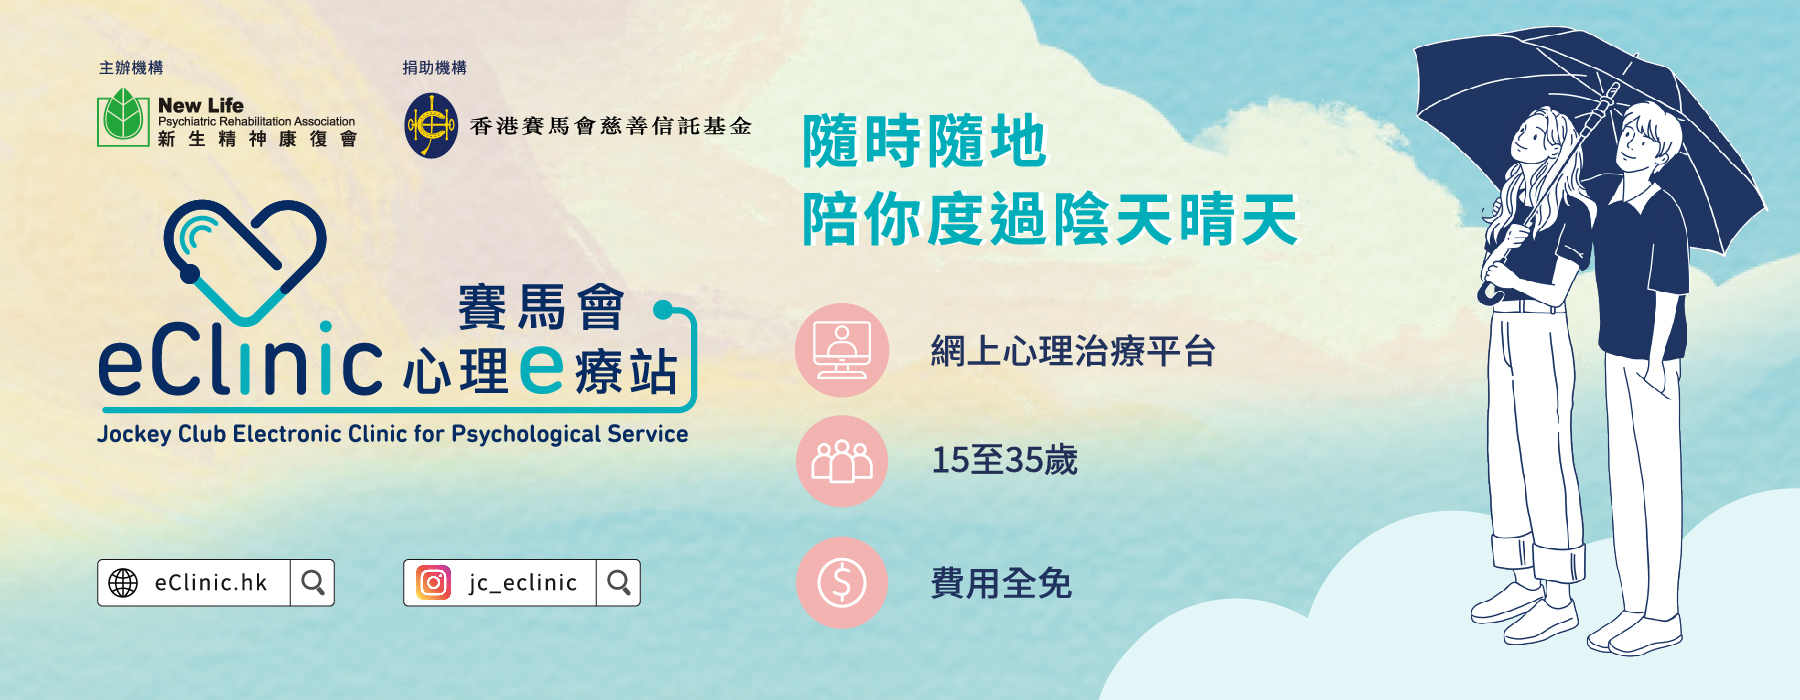 A banner link to Jockey club eclinic, which is an free  psychological service platform target at age of 15-35 youngsters (Information in Chinese)